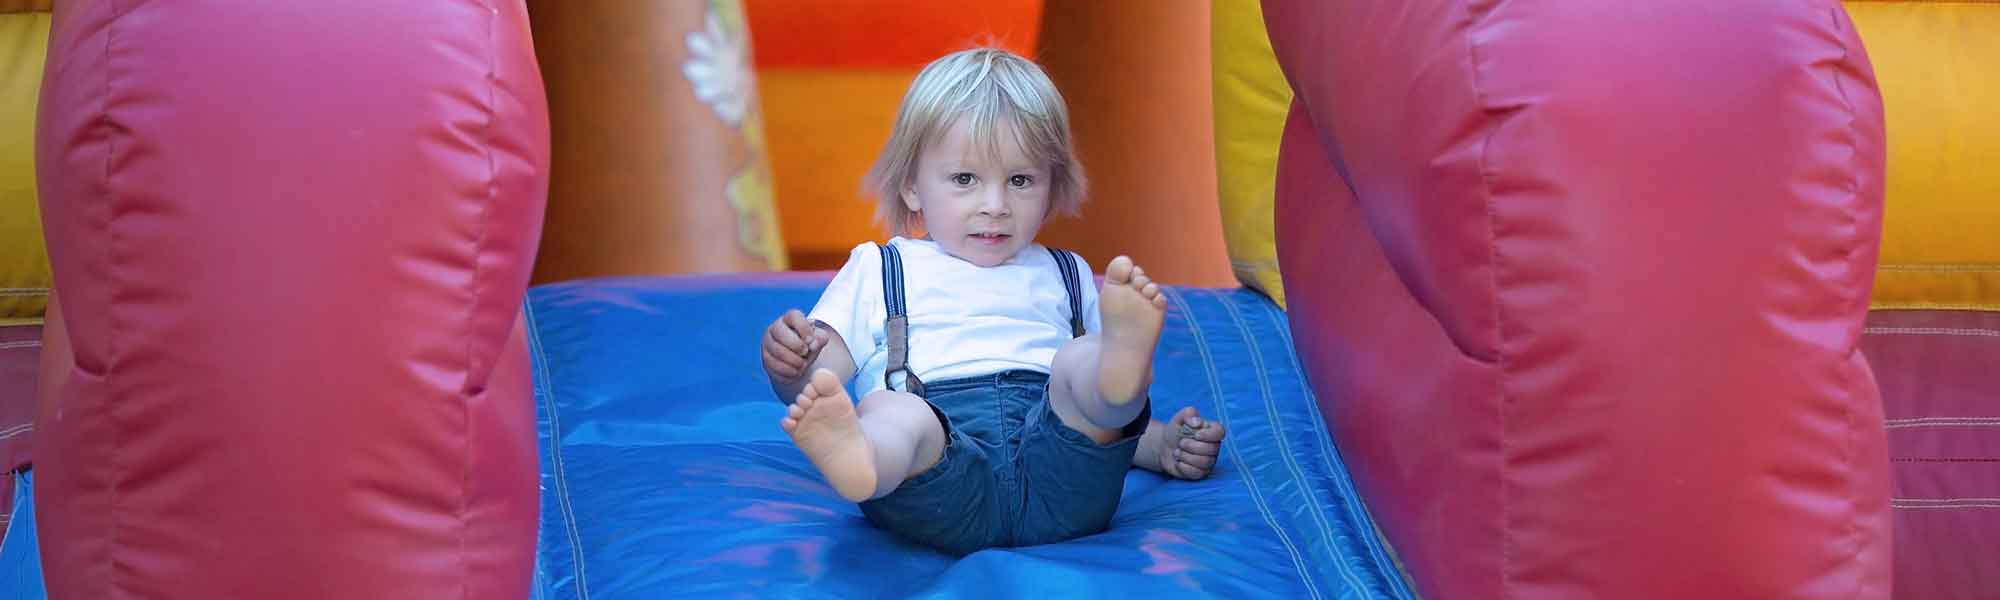 A child sliding on an inflatable slide.